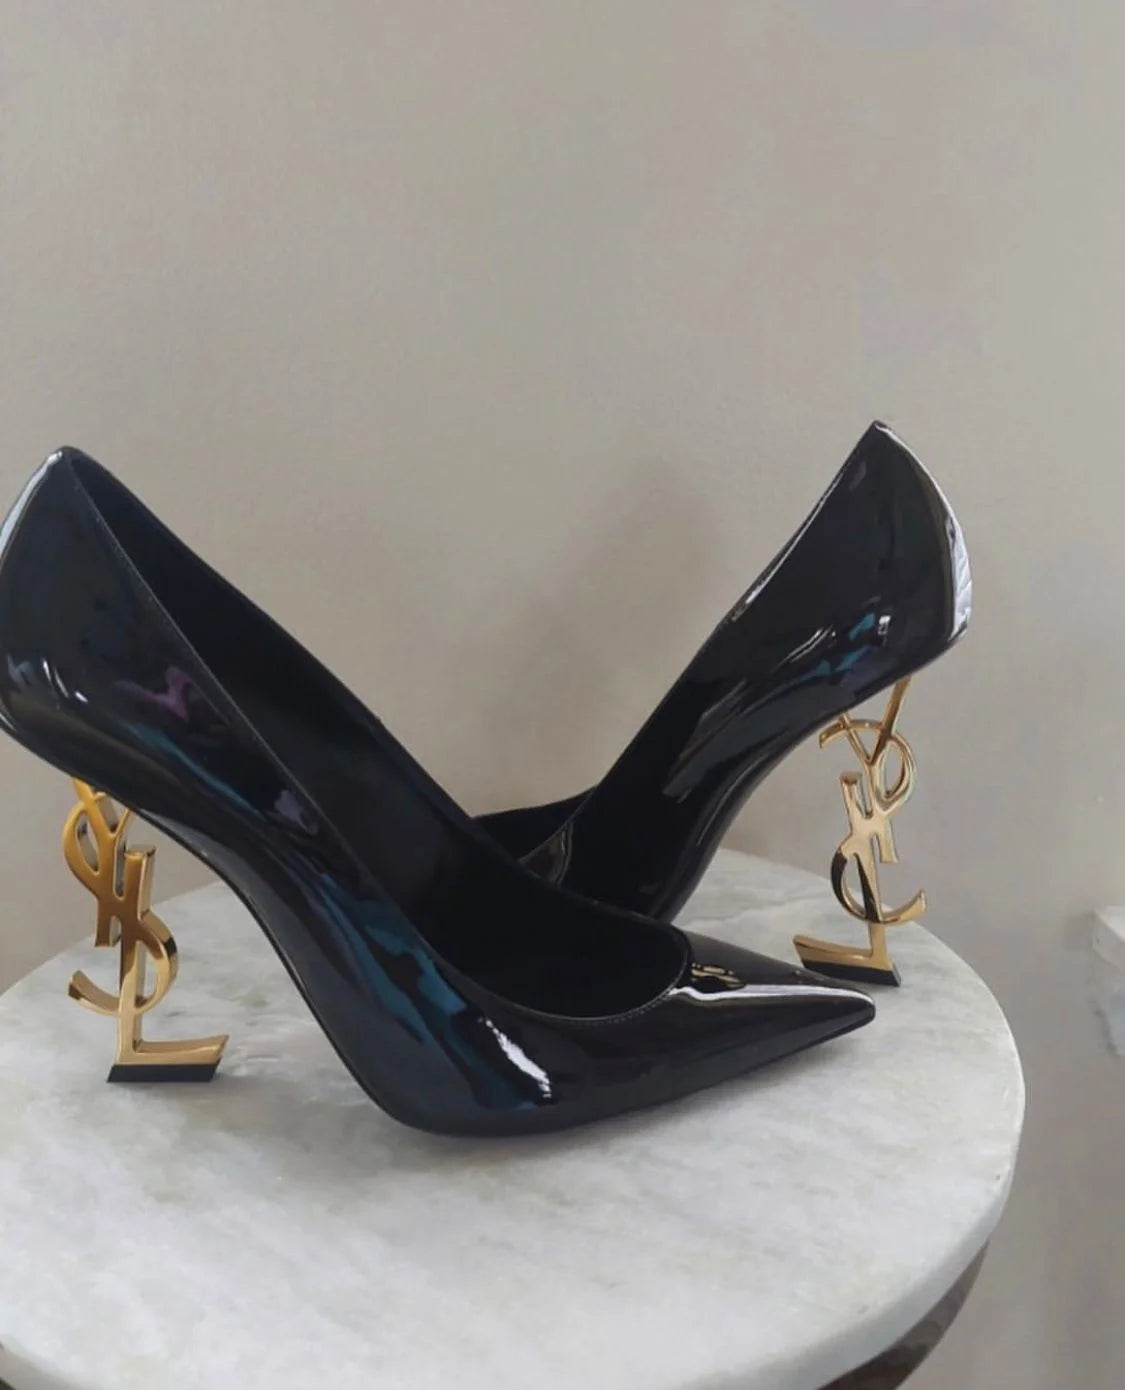 YSL - OPYUM PUMPS IN PATENT LEATHER